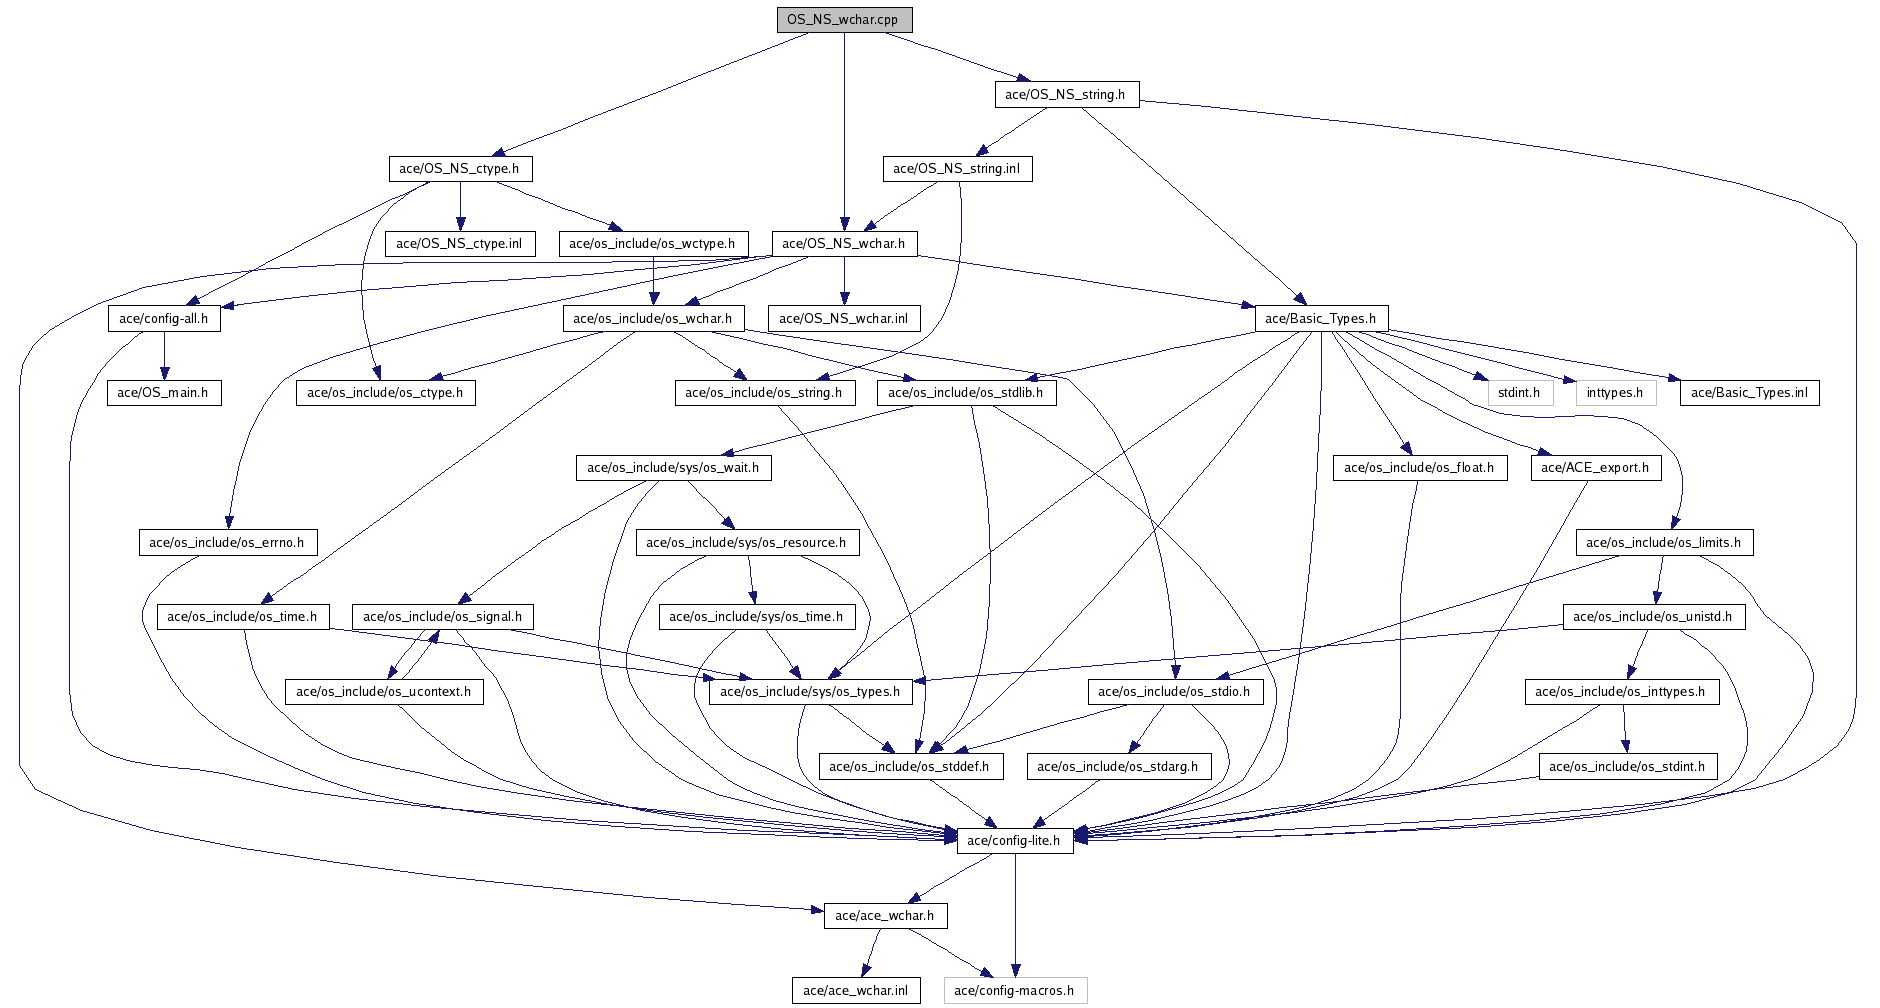 Config cpp. НС диаграмма. Wchar. Buildroot dependency graph.